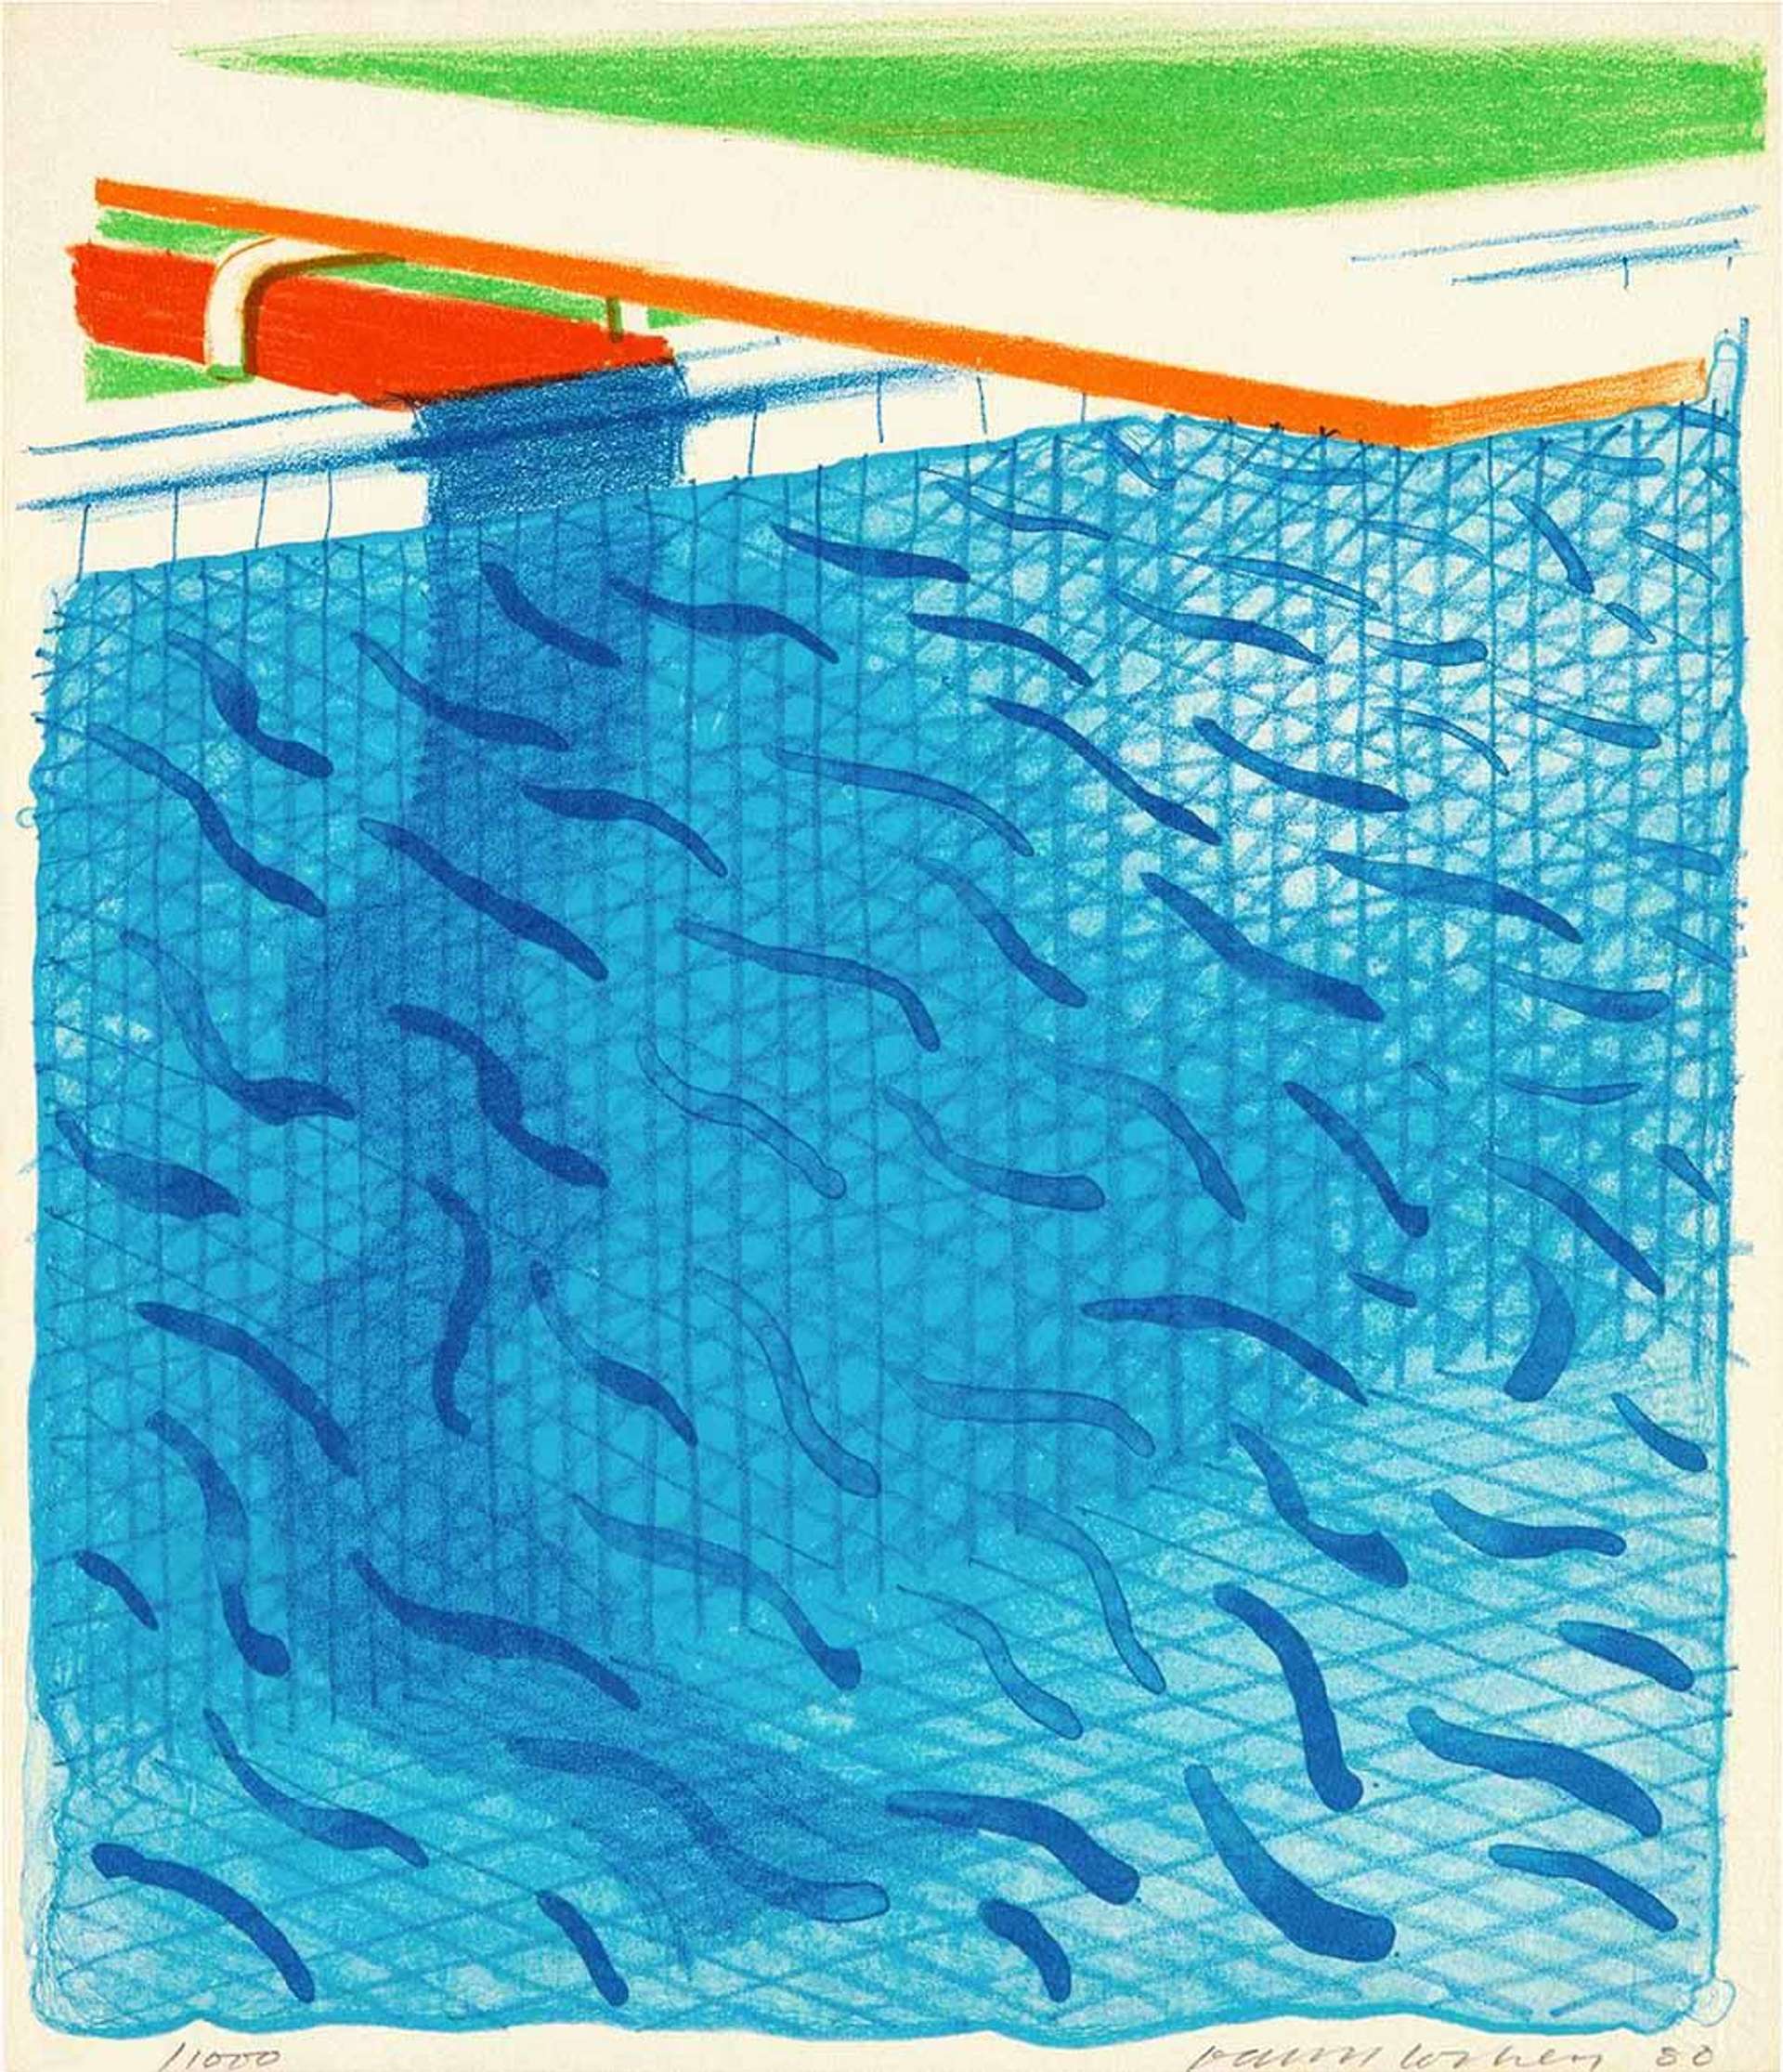 An image of a print by David Hockney, showing a deep swimming pool underneath an orange diving board. A small patch of grass peaks from the top right corner.